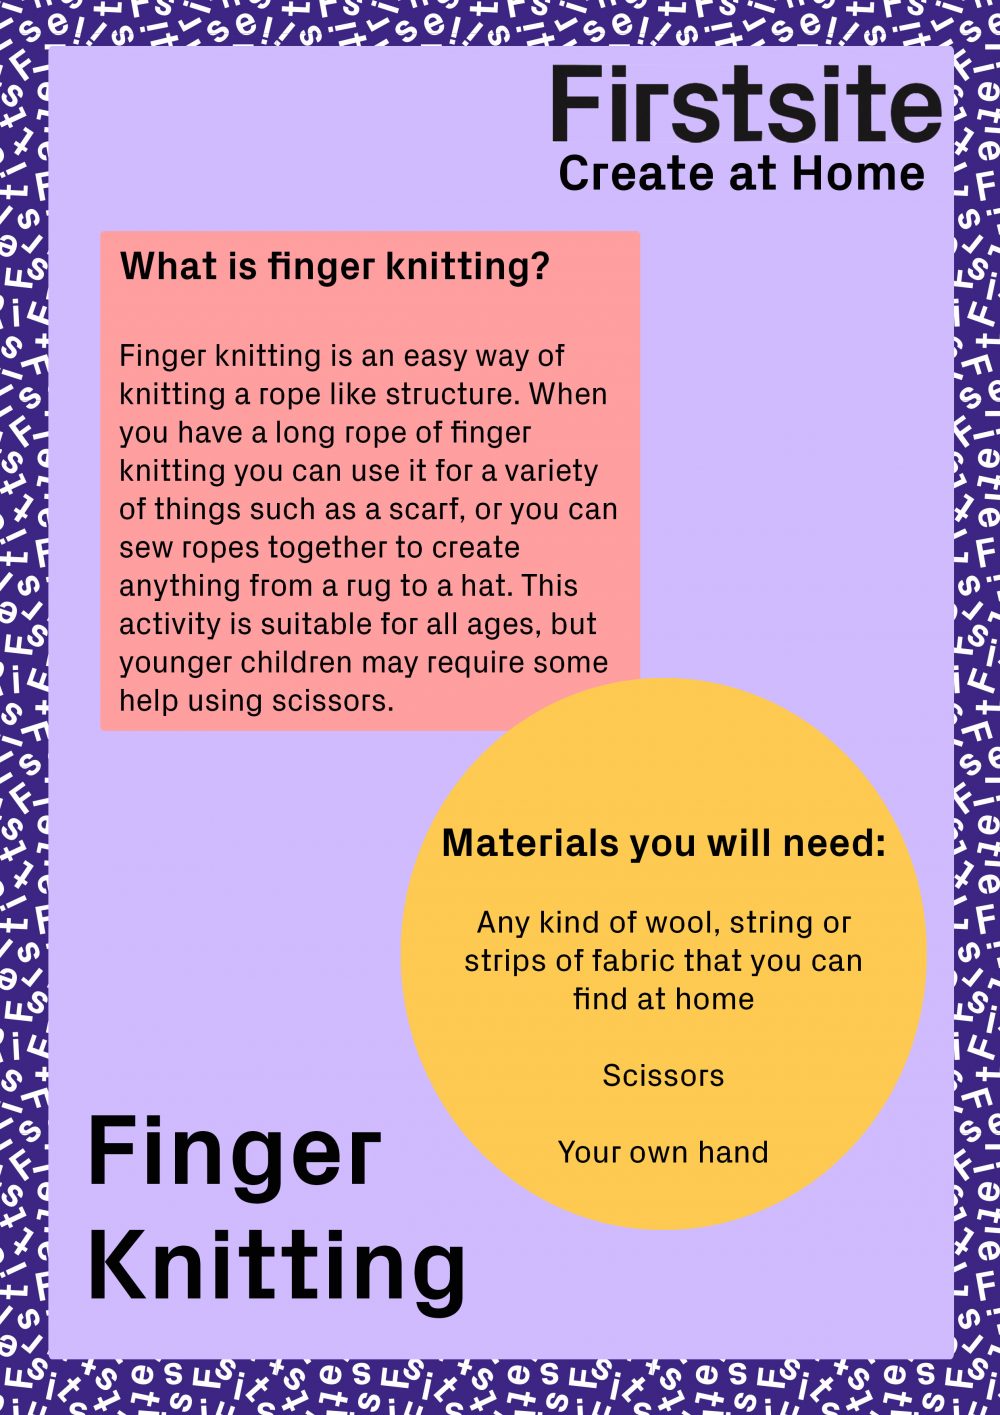 instructions for finger knitting page 1 of 3